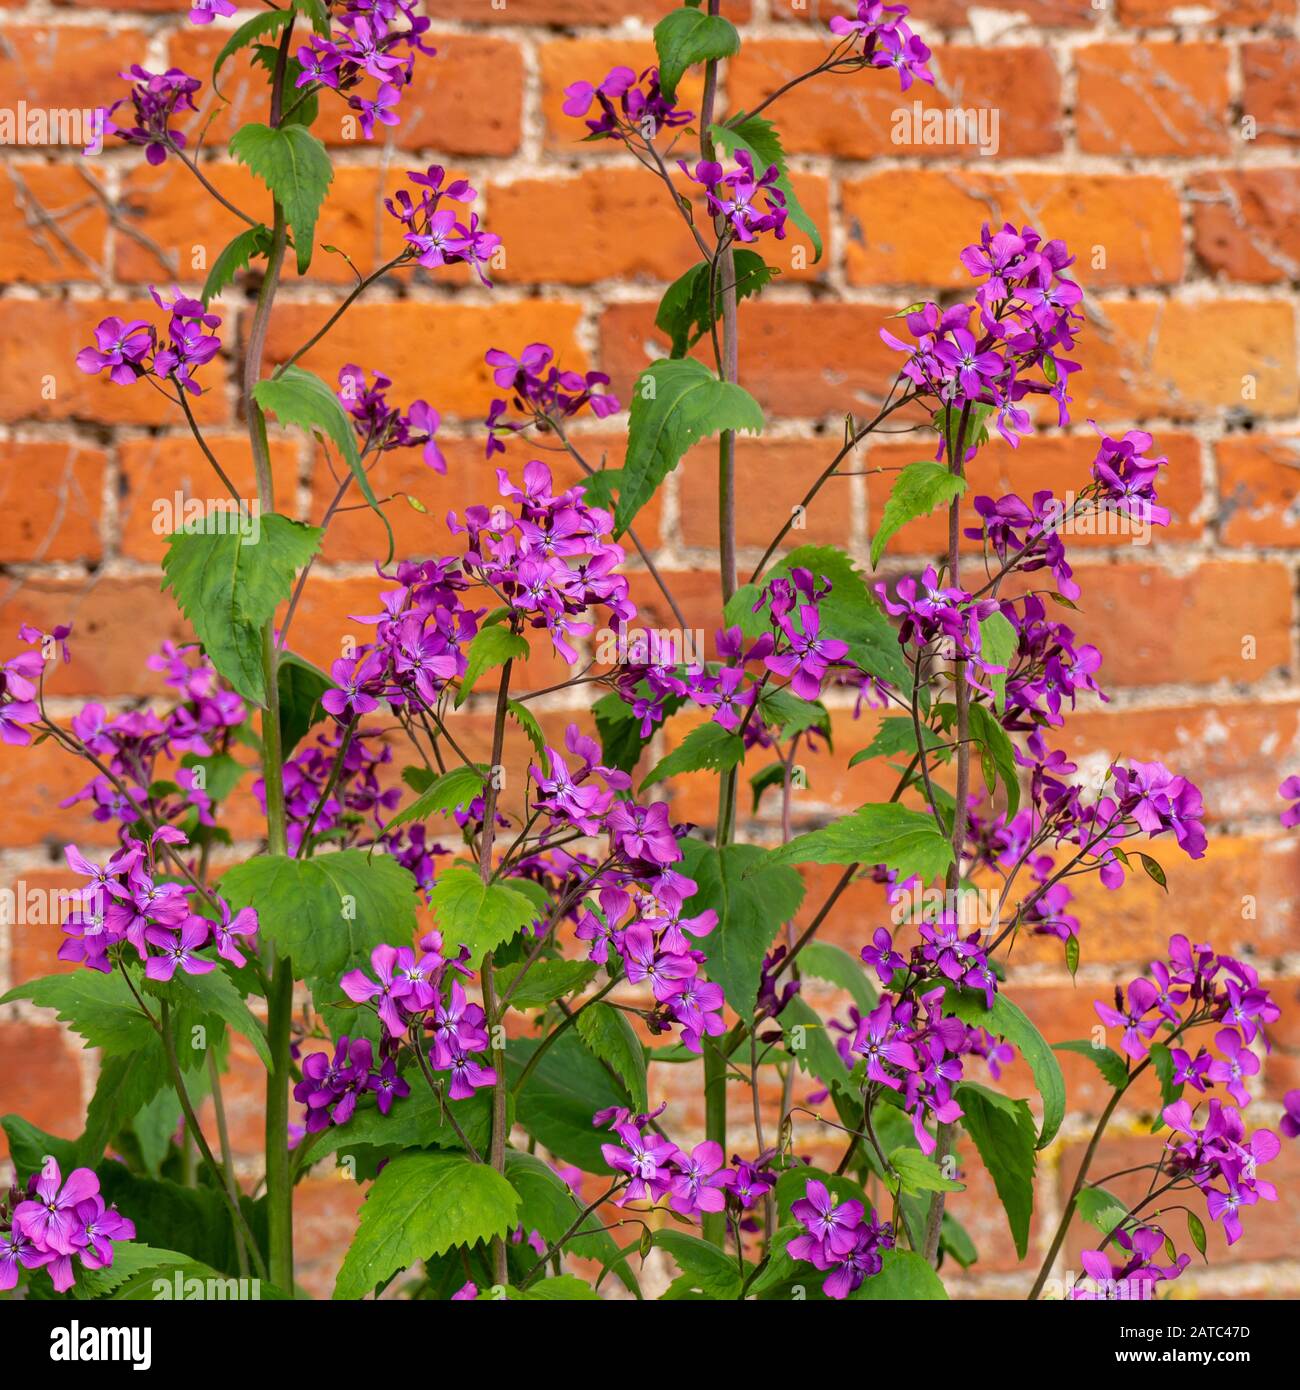 Purple Honesty, Lunaria annua, flowering in cottage garden with old brick wall in background Stock Photo